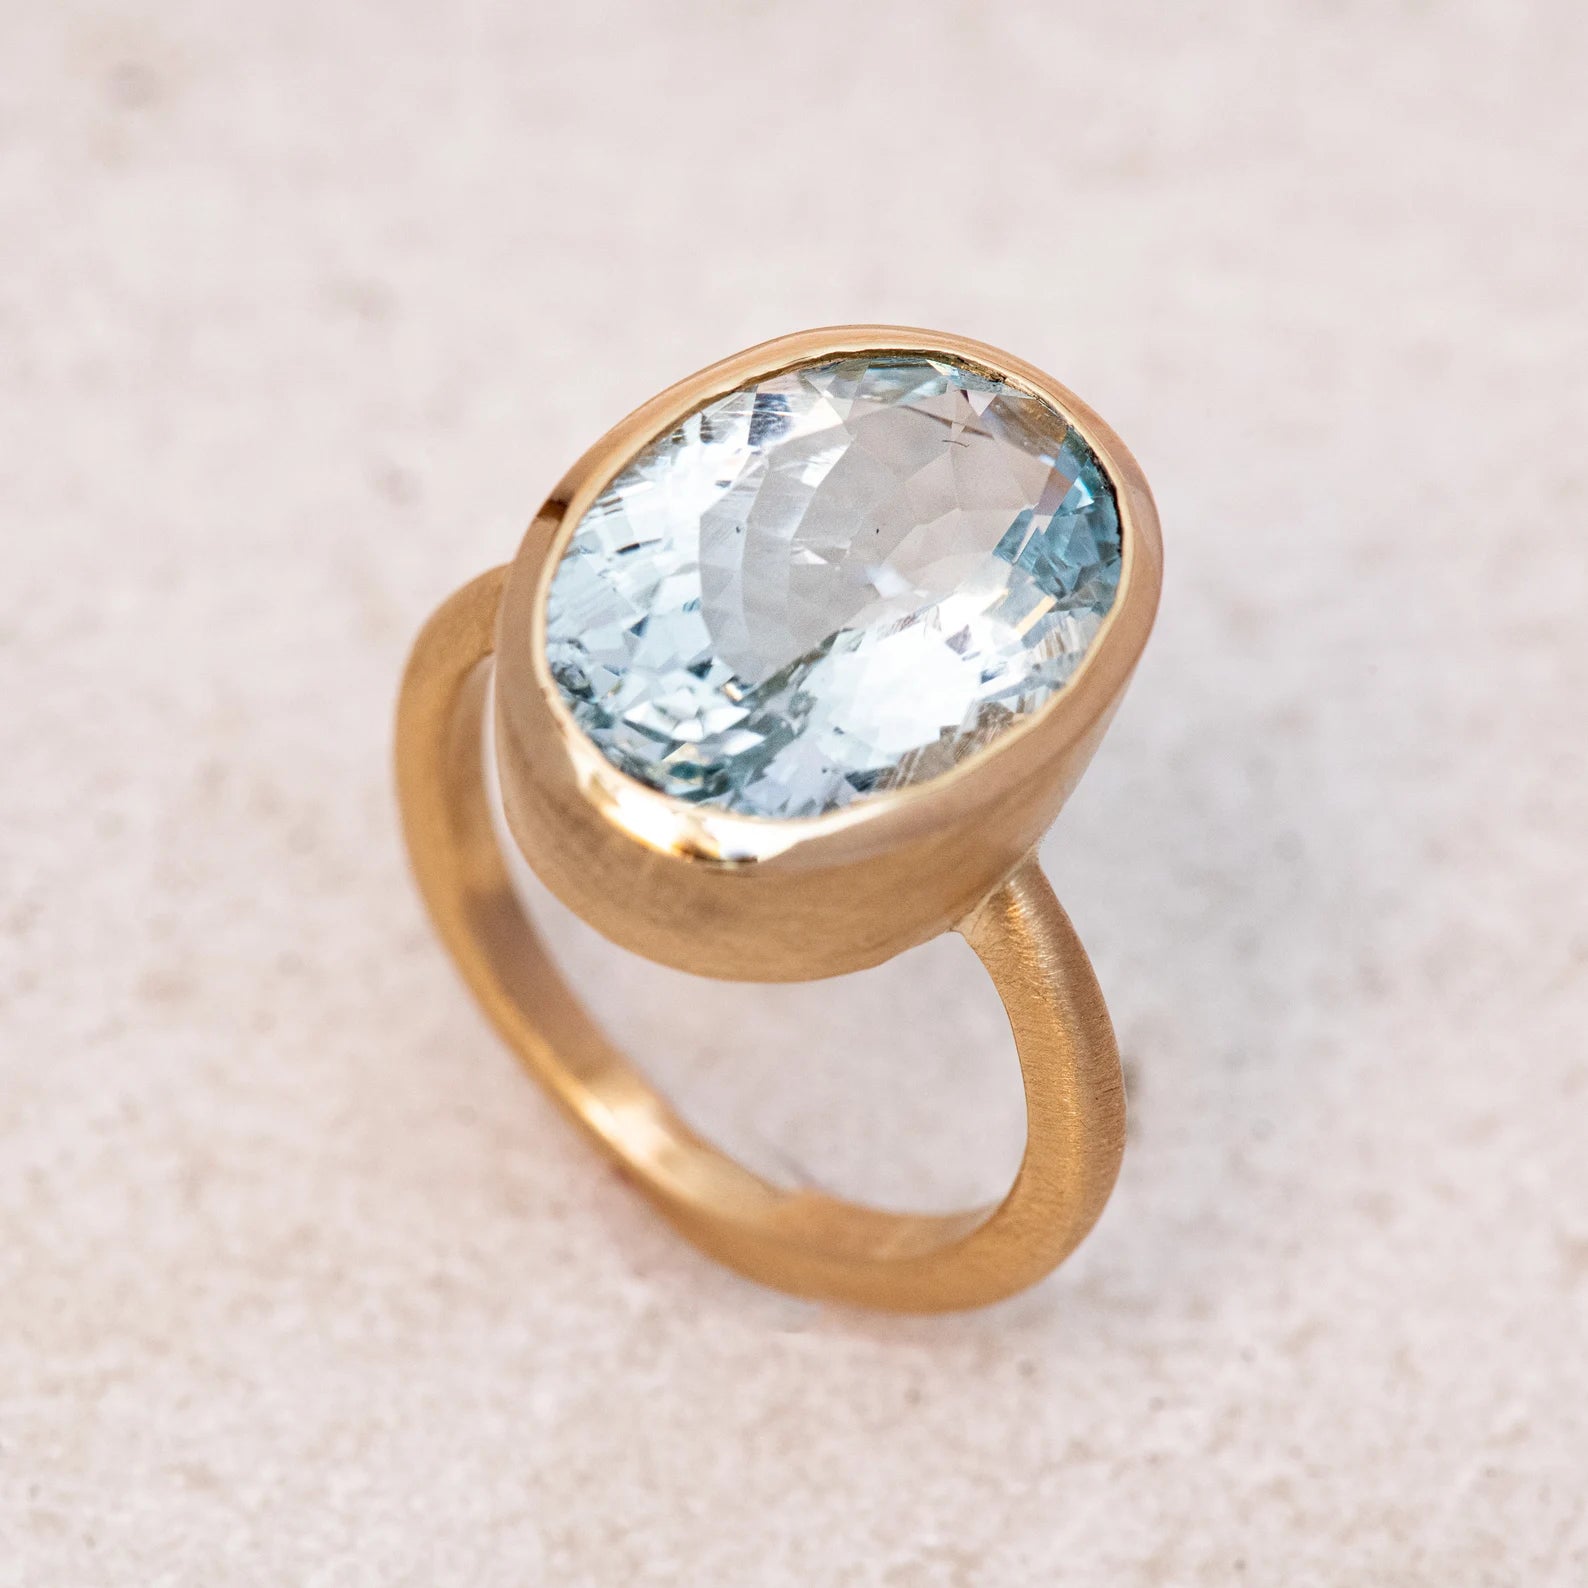 A Large Oval Aquamarine Ring in Yellow Gold with an aquamarine stone, handmade by Cassin Jewelry.